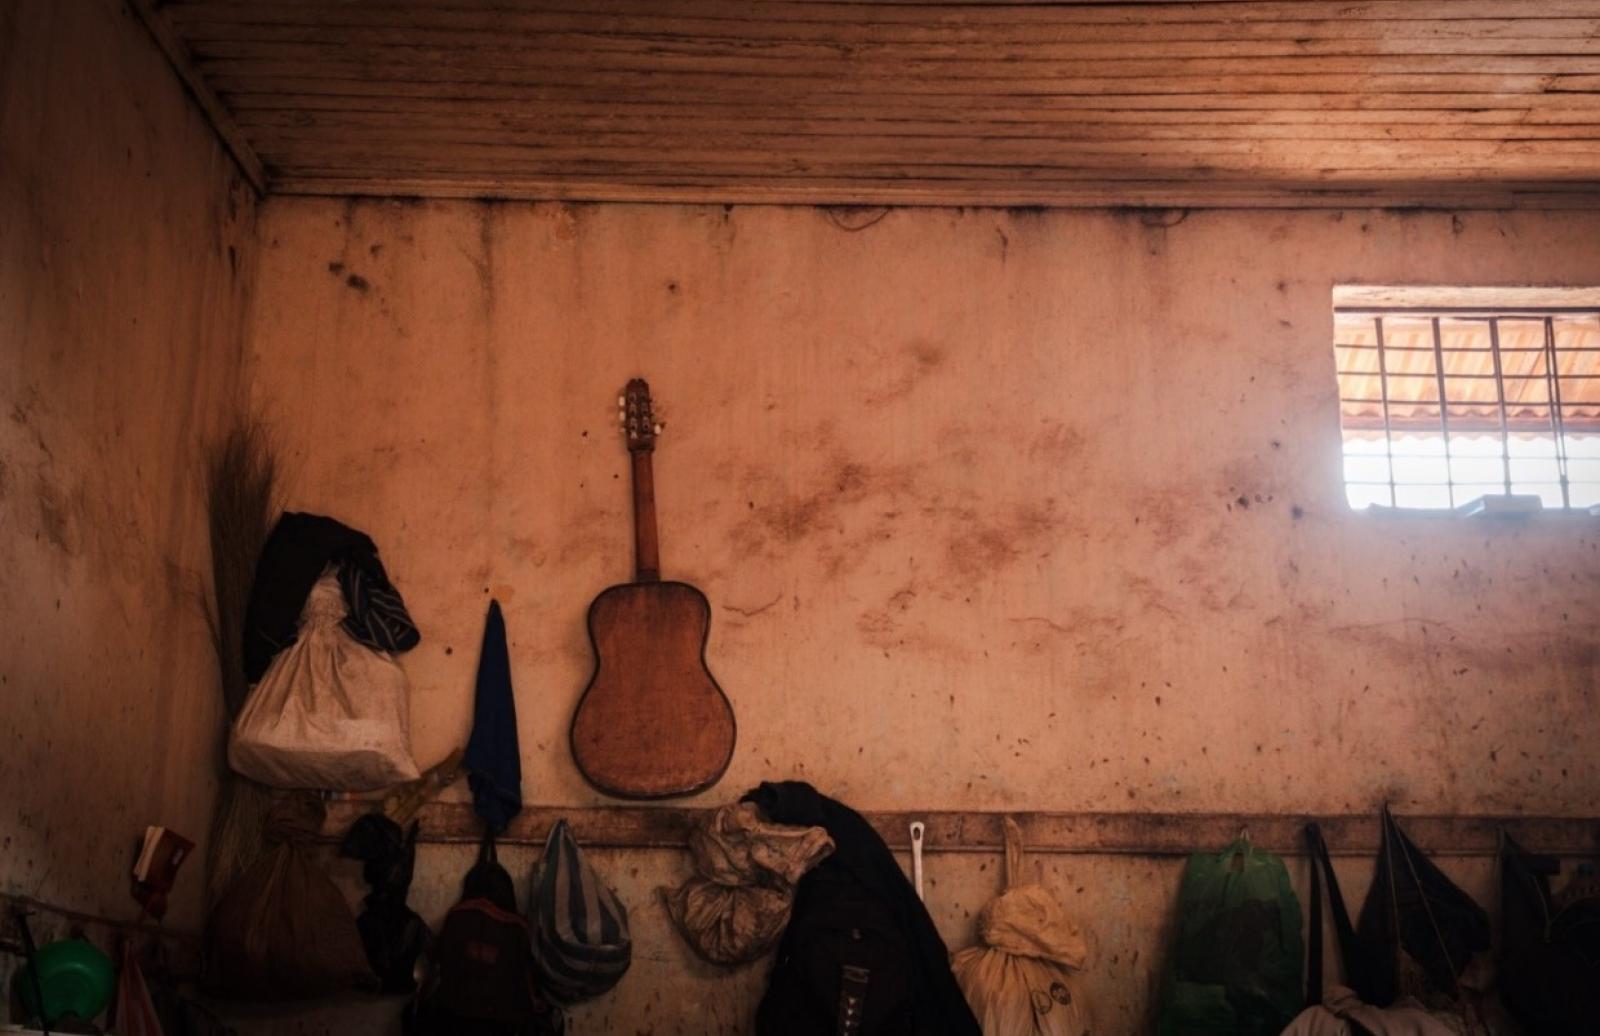 A guitar on the wall of a prison cell